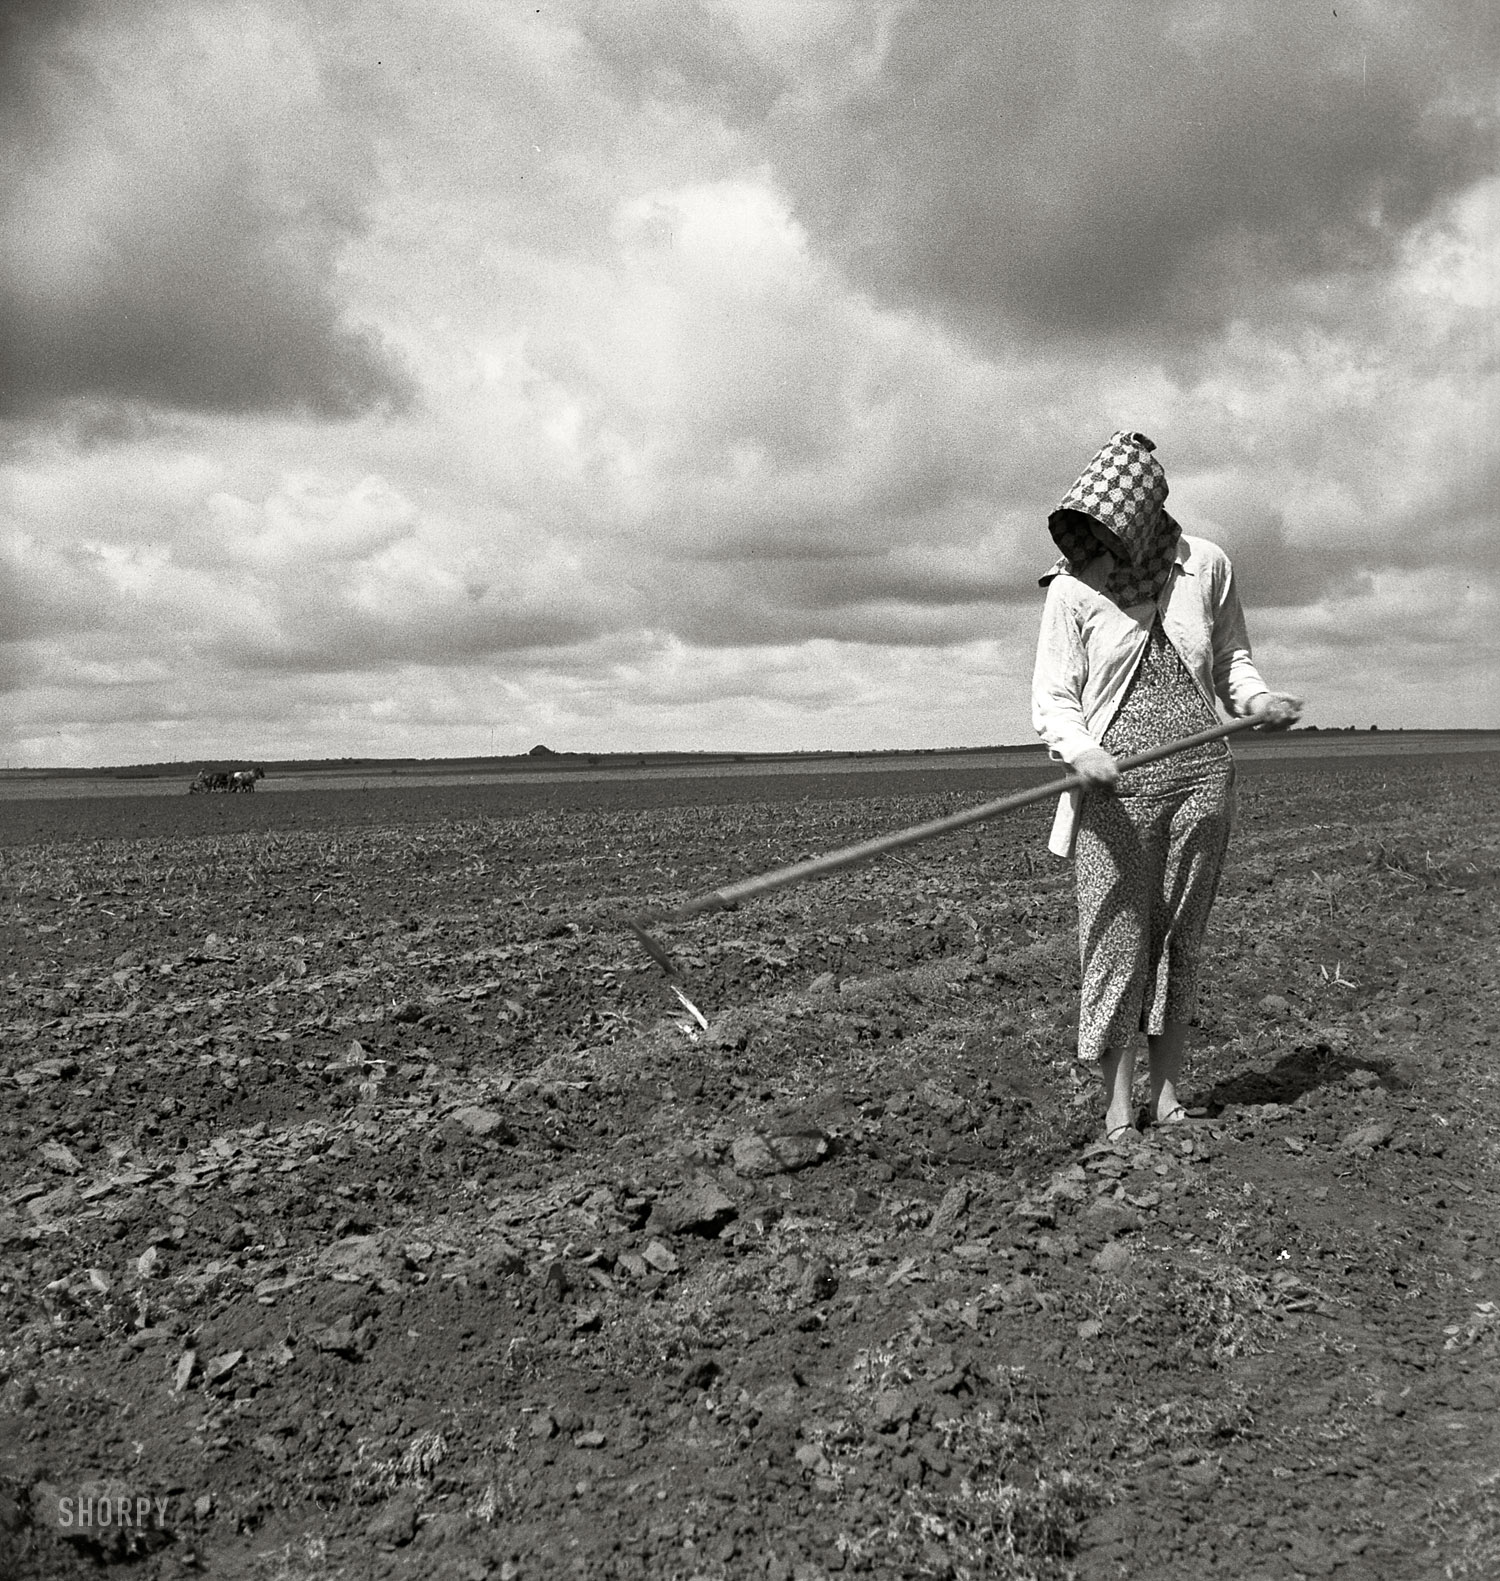 June 1937. "Wife of Texas tenant farmer. The wide lands of the Texas Panhandle are typically operated by white tenant farmers, i.e., those who possess teams and tools and some managerial capacity." Medium-format nitrate negative by Dorothea Lange for the Farm Security Administration. View full size.